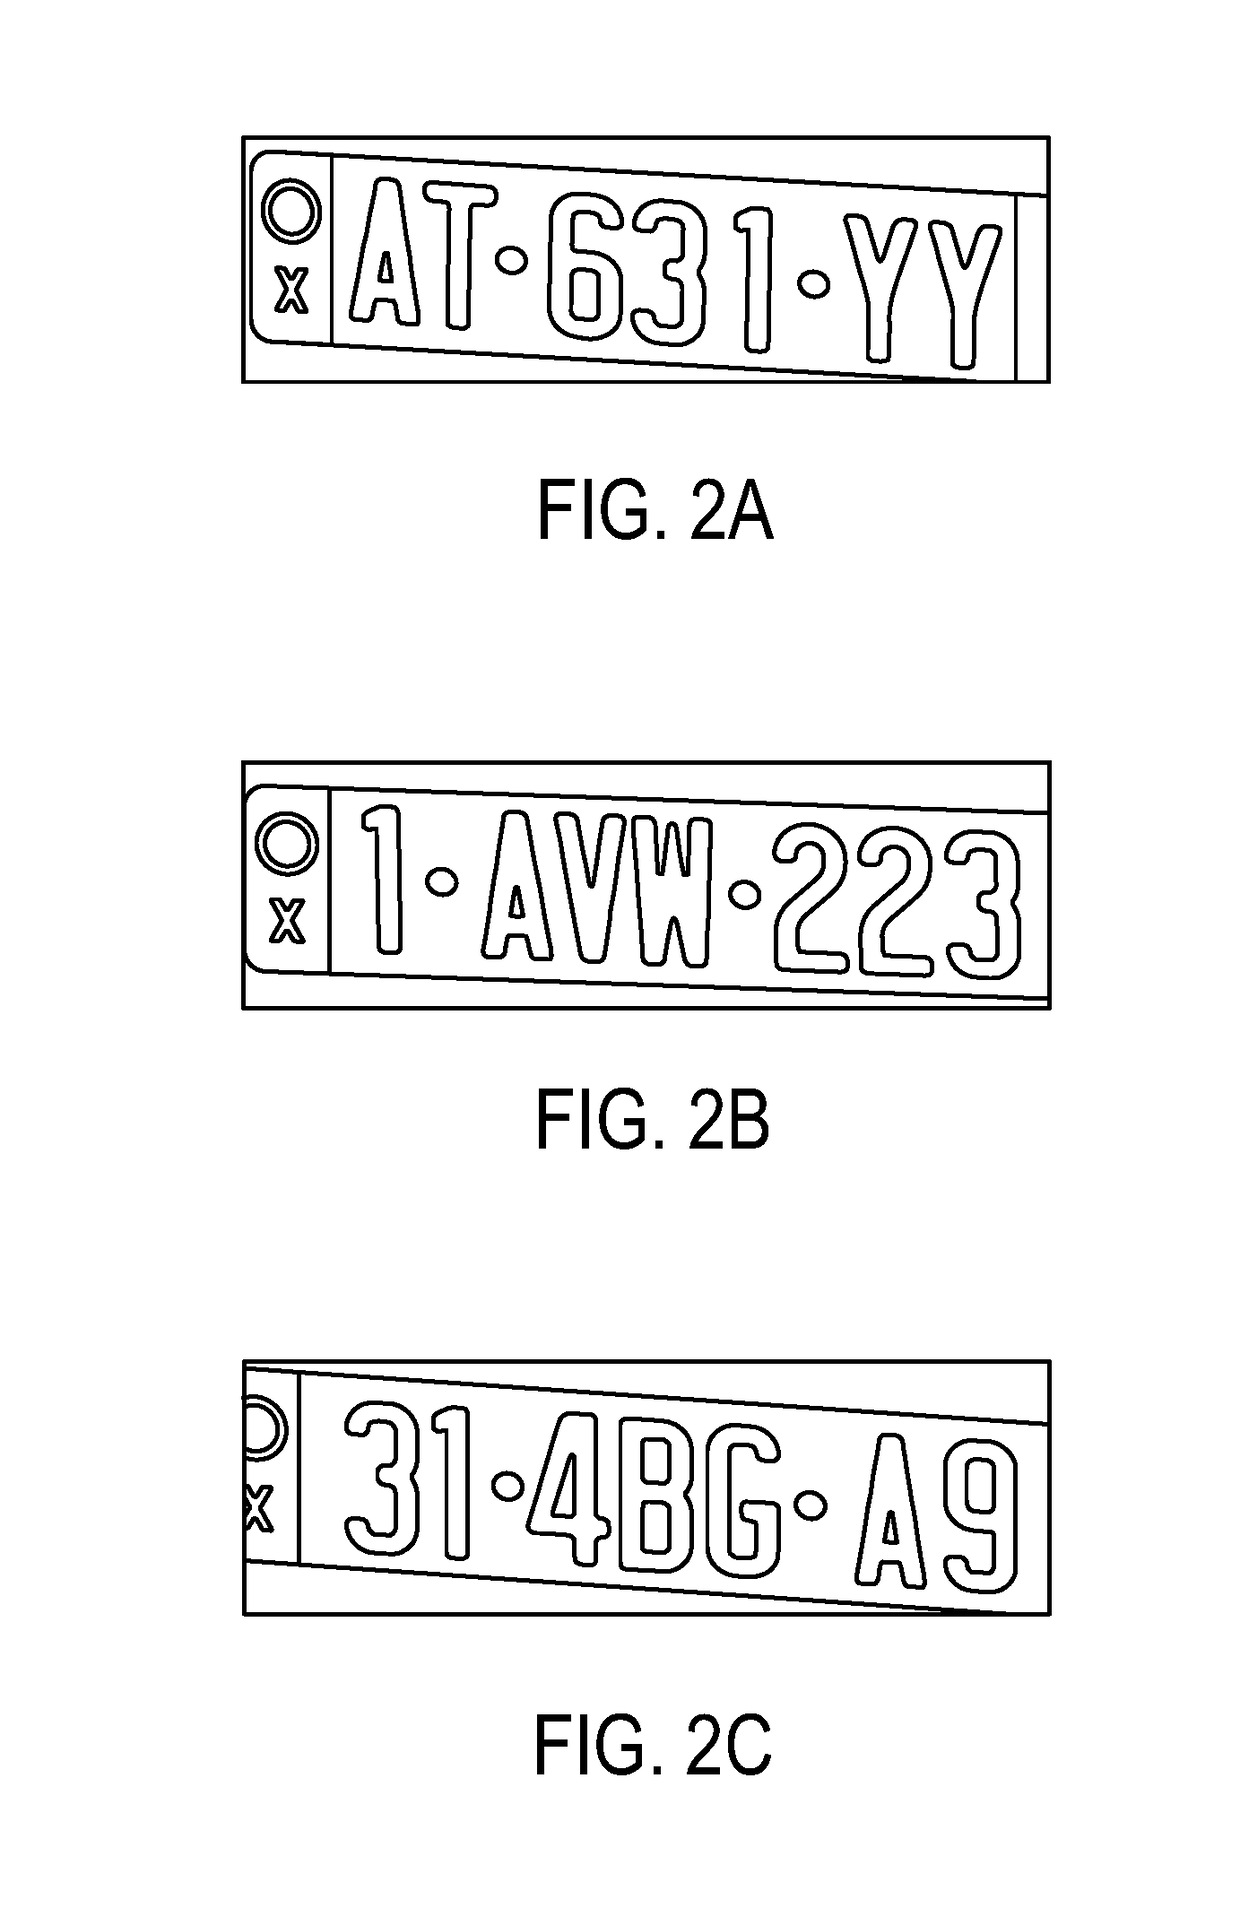 License plate recognition with low-rank, shared character classifiers